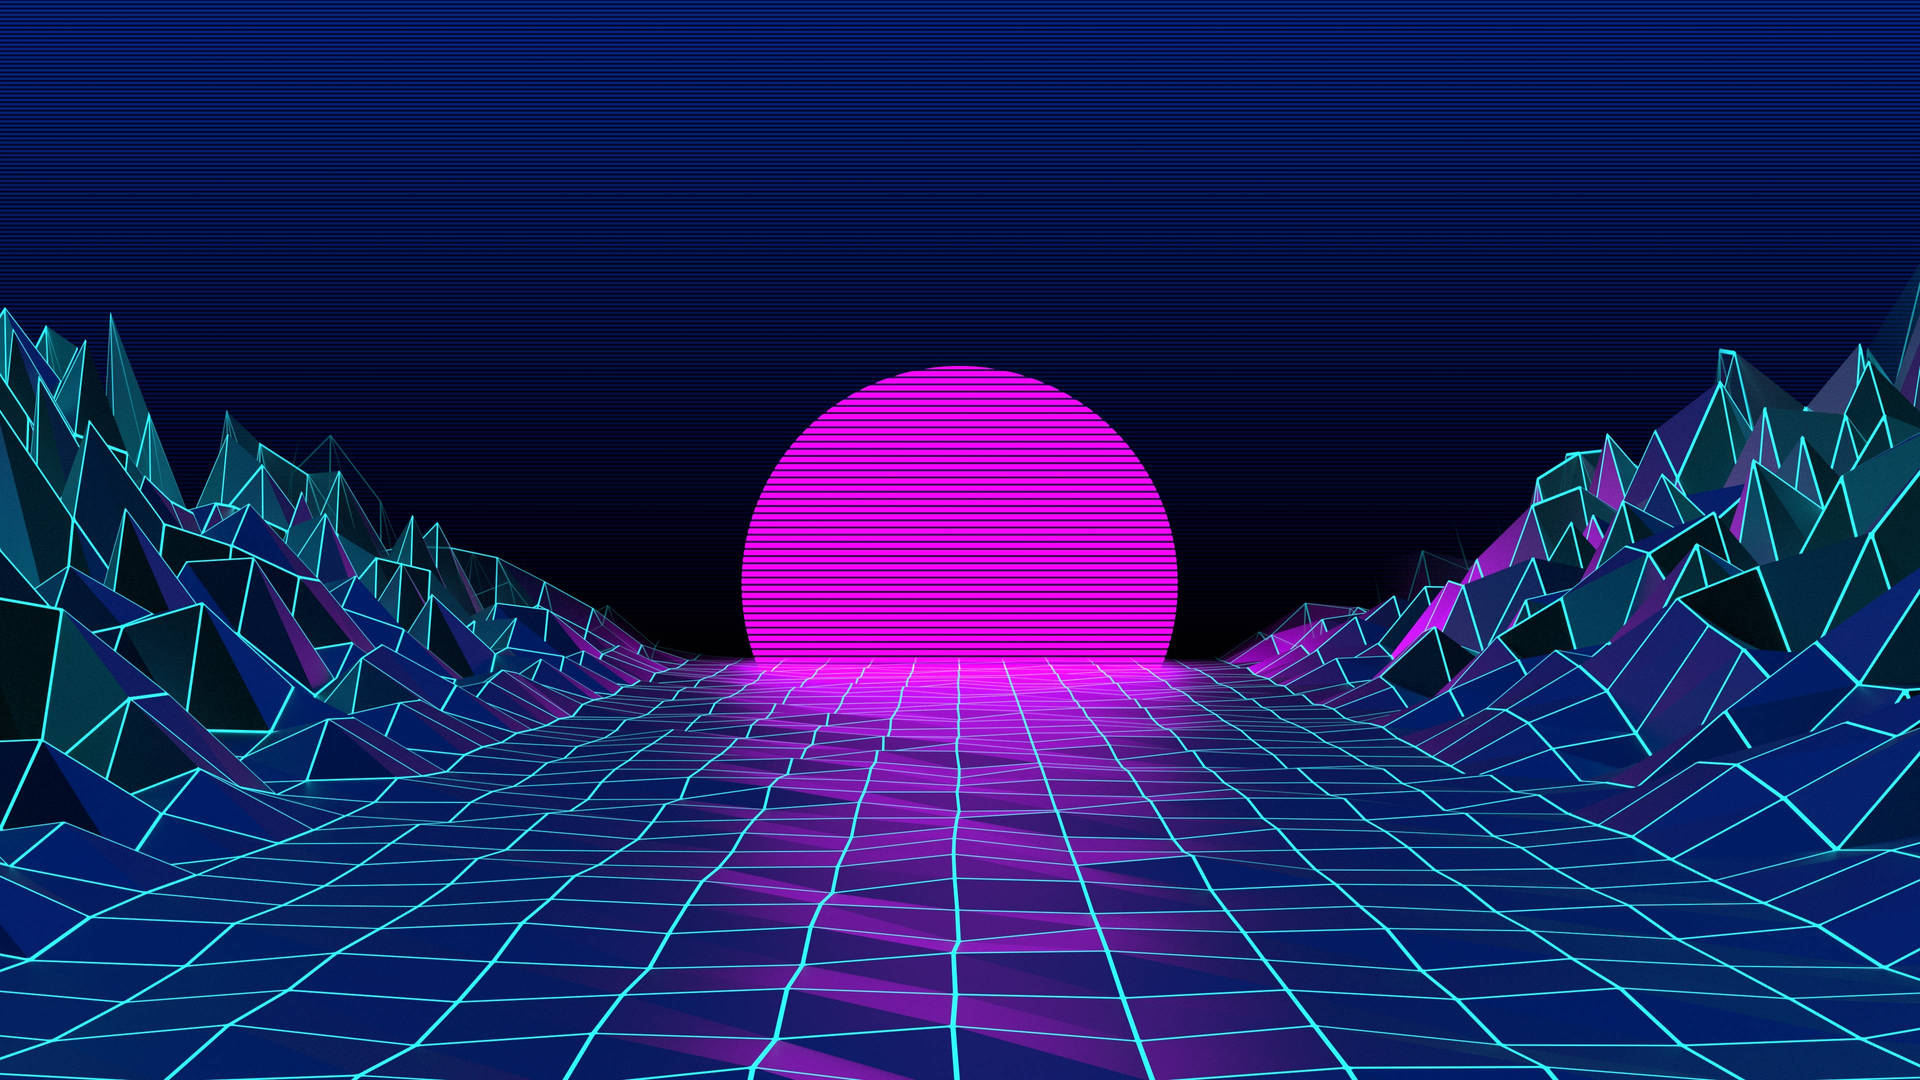 80s Synthwave Aesthetic Cover Wallpaper